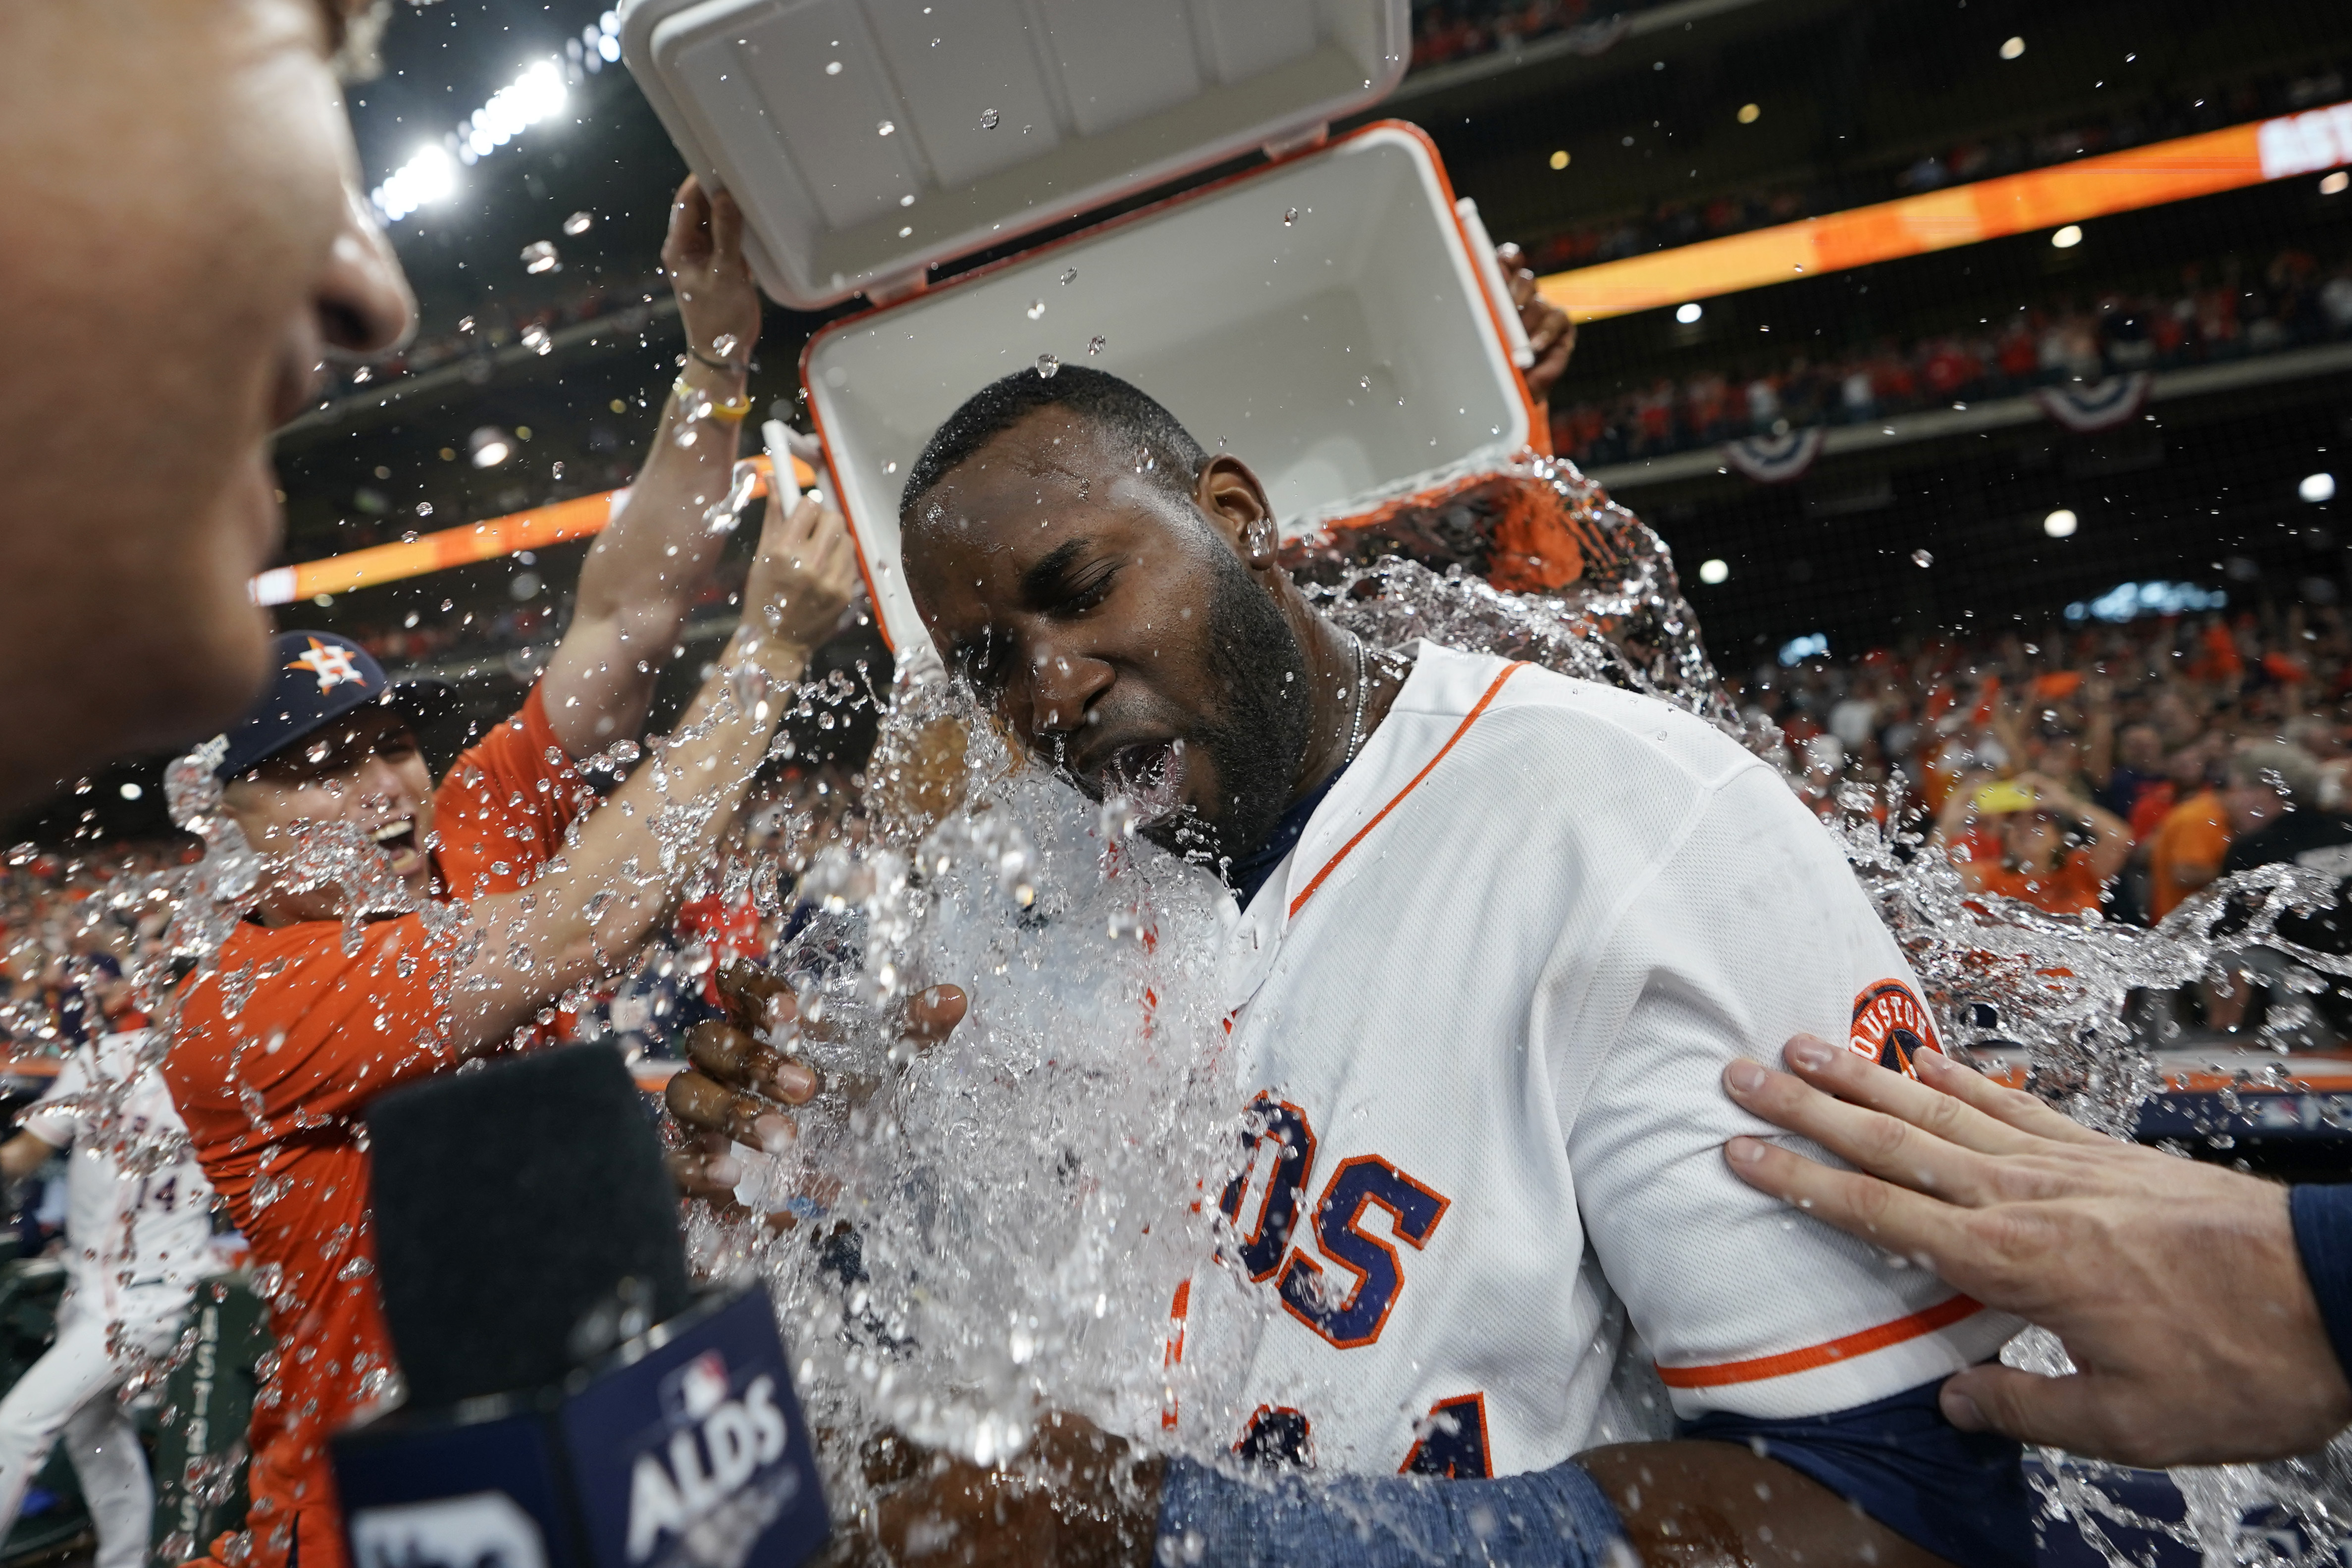 Houston Astros - THE HOUSTON ASTROS ARE HEADED TO THE WORLD SERIES!  #LevelUp